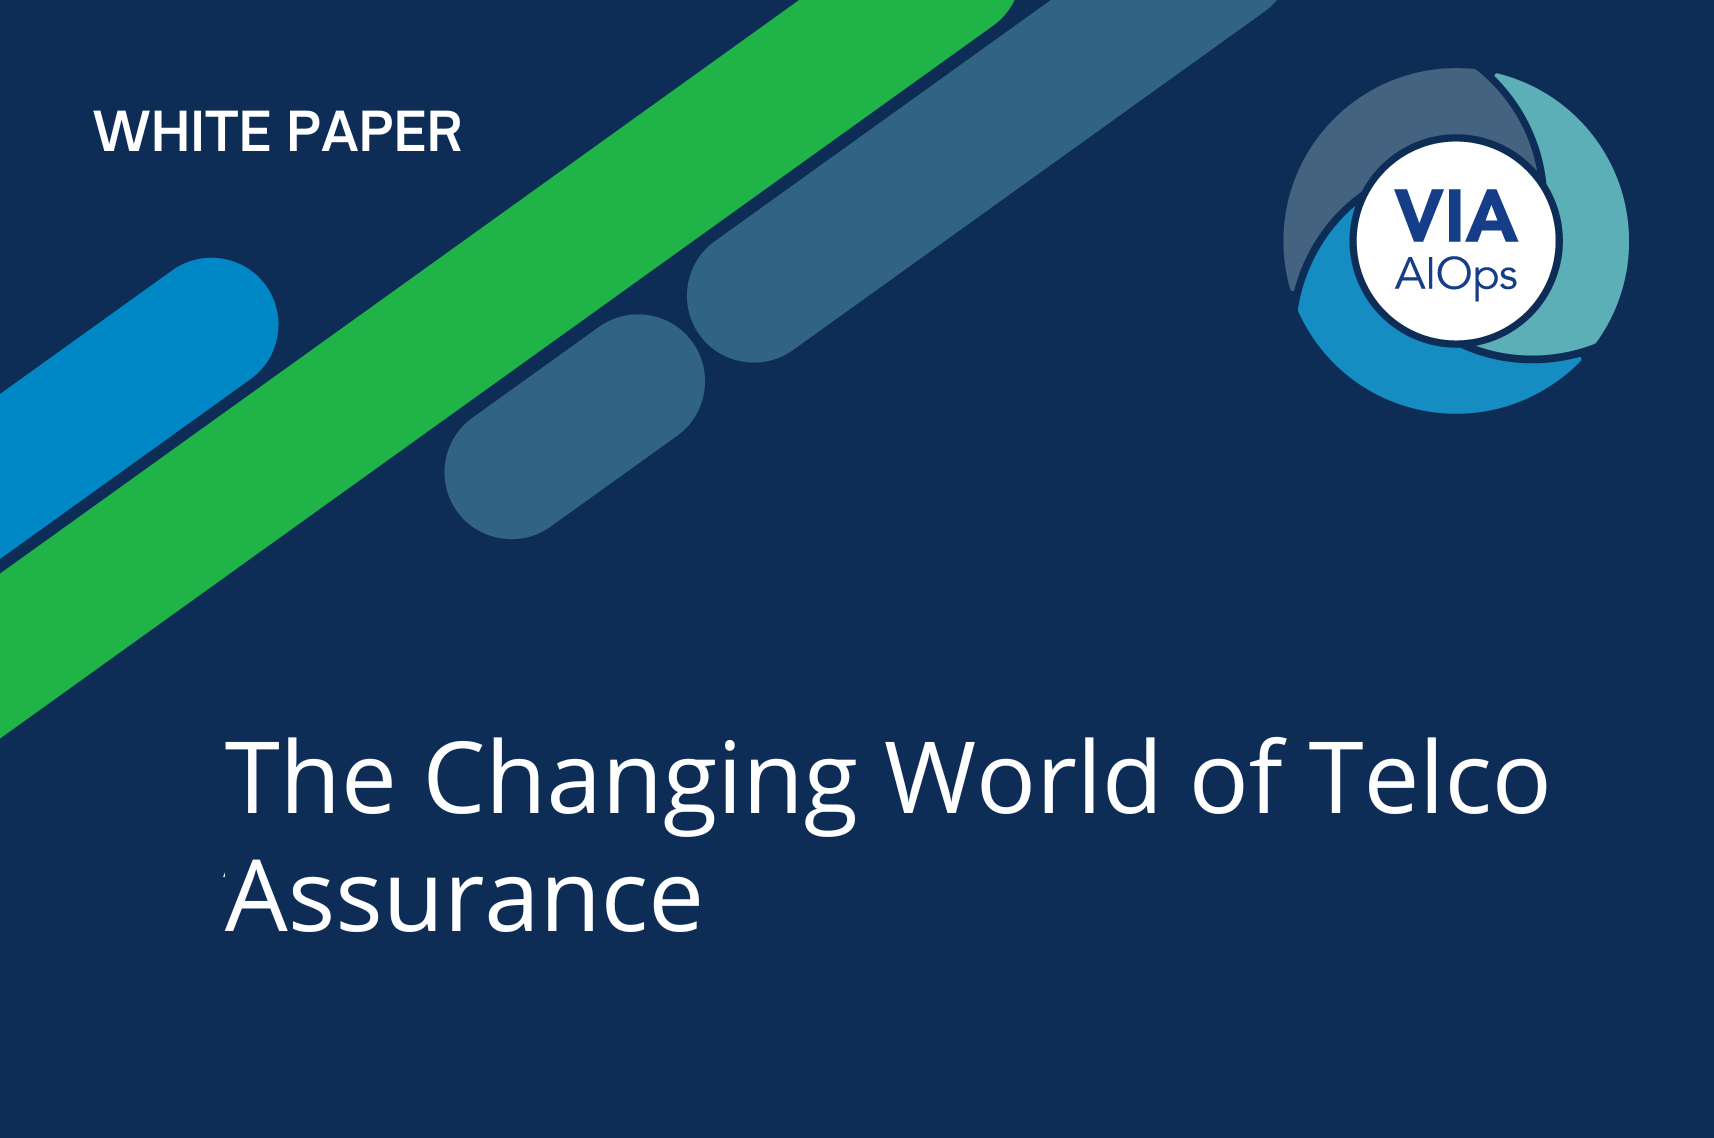 The Changing World of Telecom Assurance